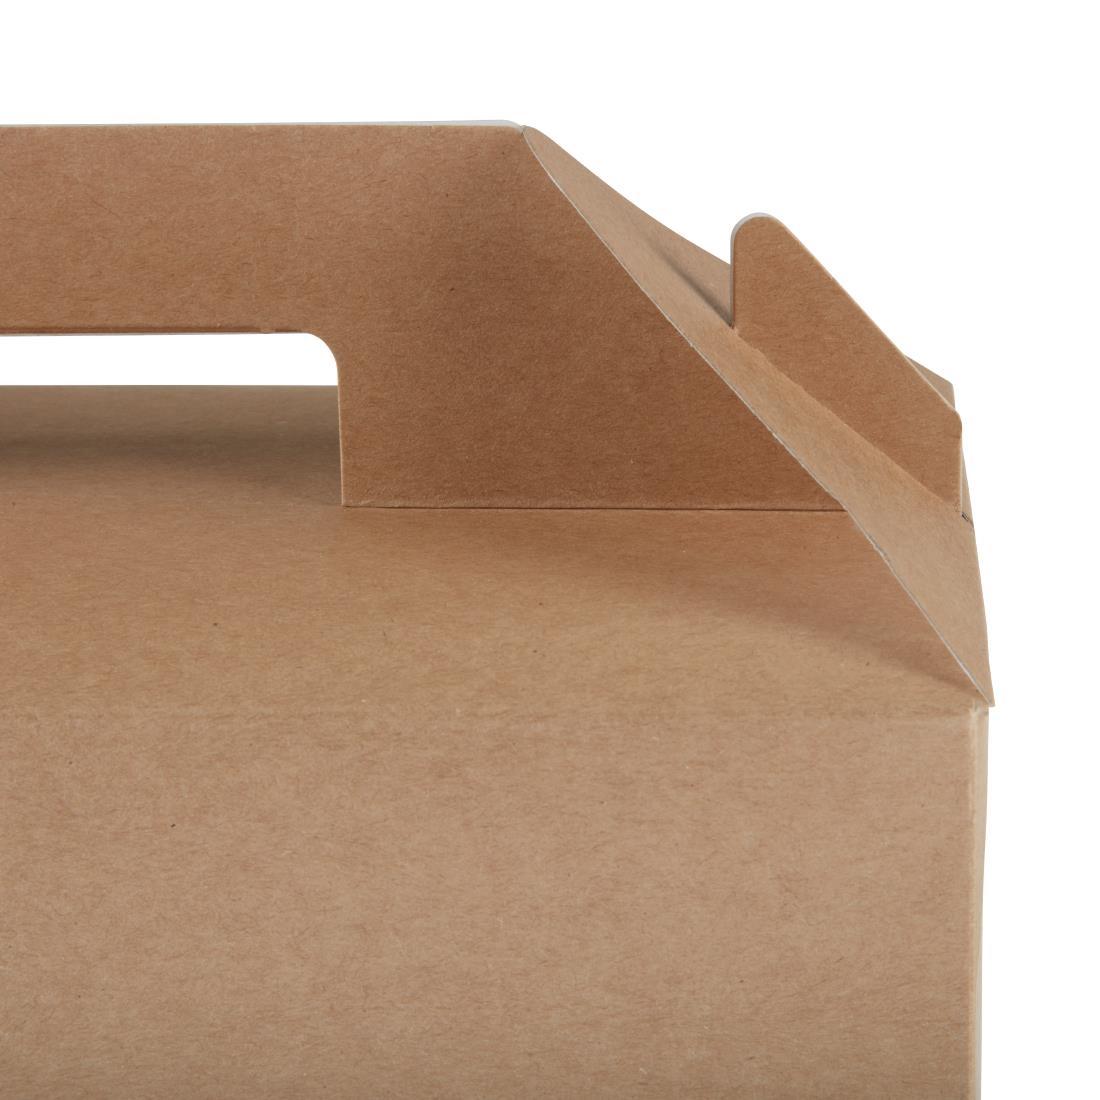 Colpac Recyclable Kraft Gable Boxes Large (Pack of 125) - FA362  - 4